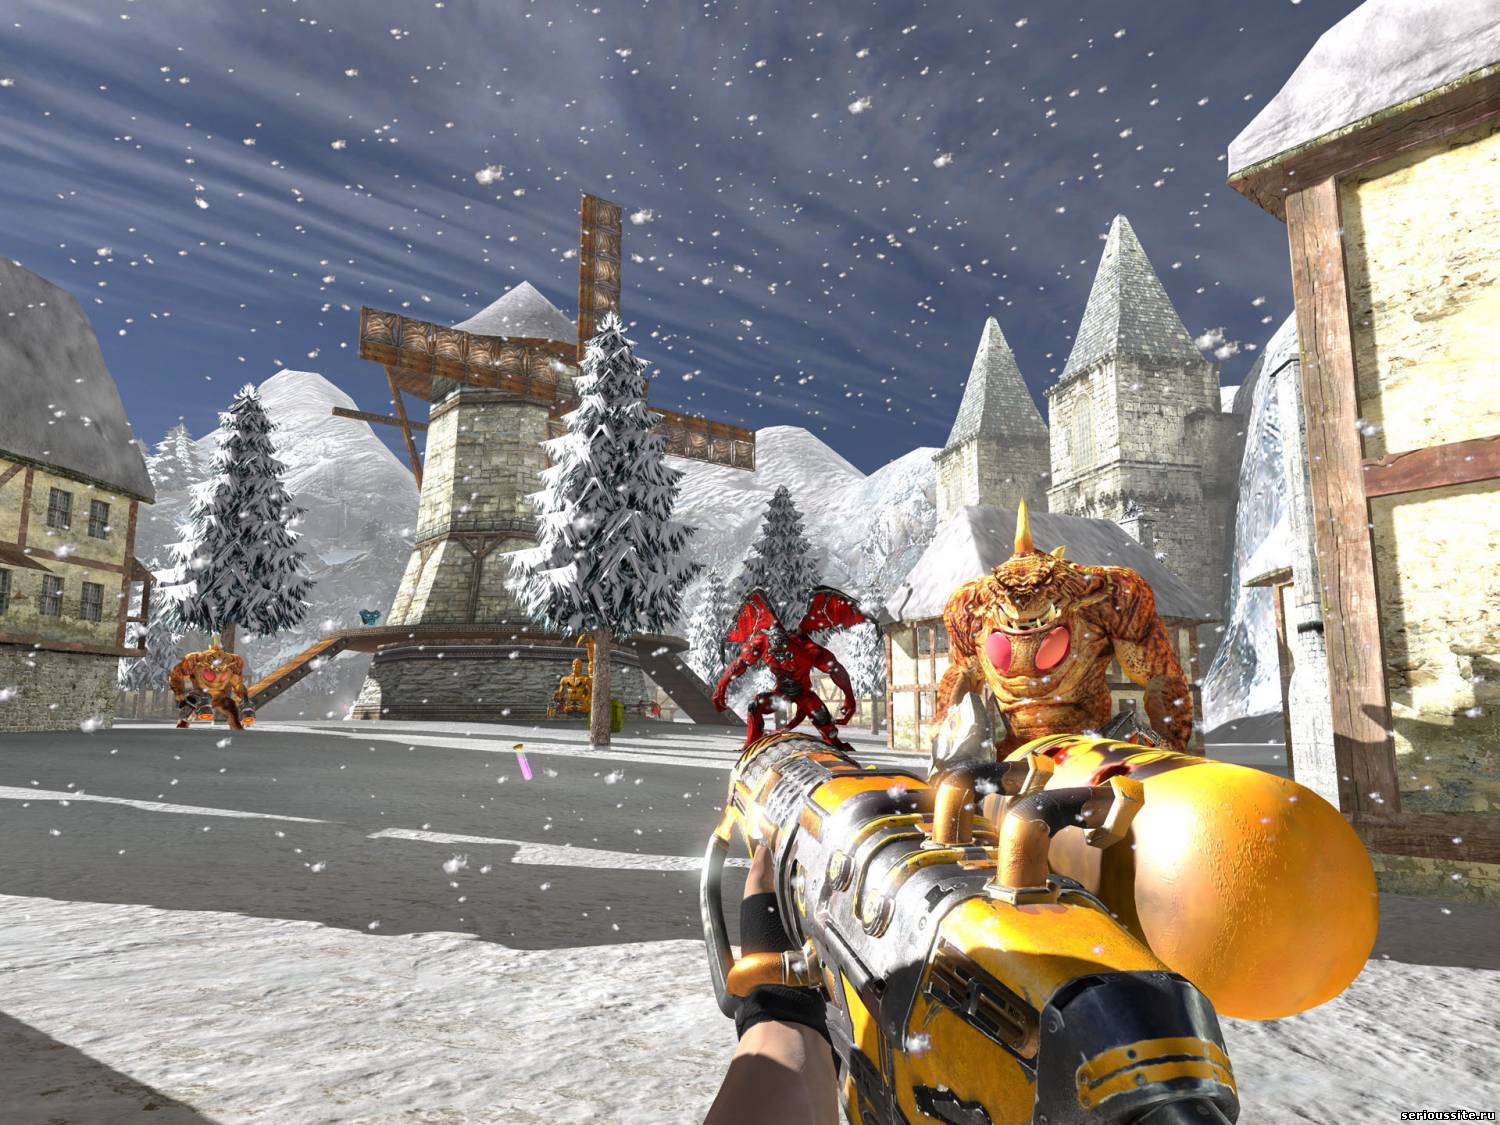 Second секунда. Serious Sam the second encounter. Игра serious Sam HD the second encounter. Serious Sam 2 HD. Serious Sam 2 the second encounter.